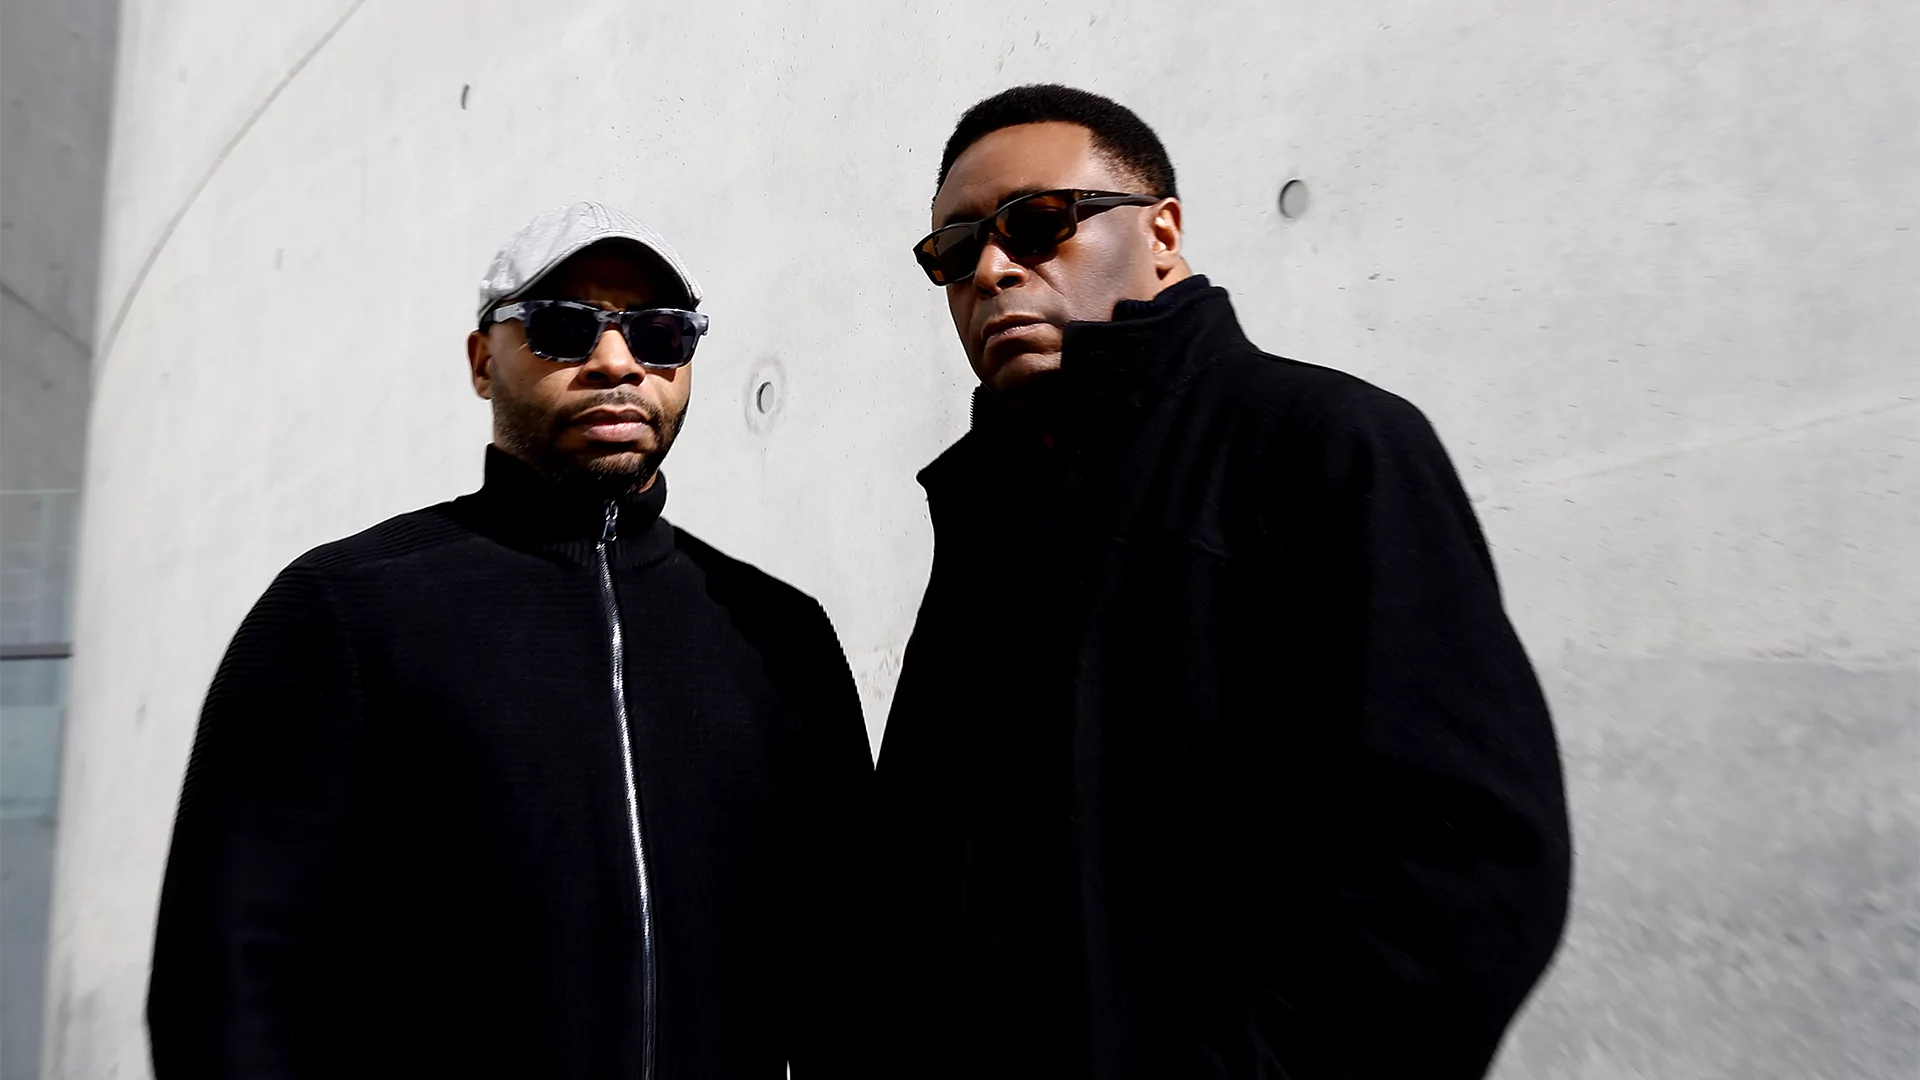 Octave One stood in front of a grey wall